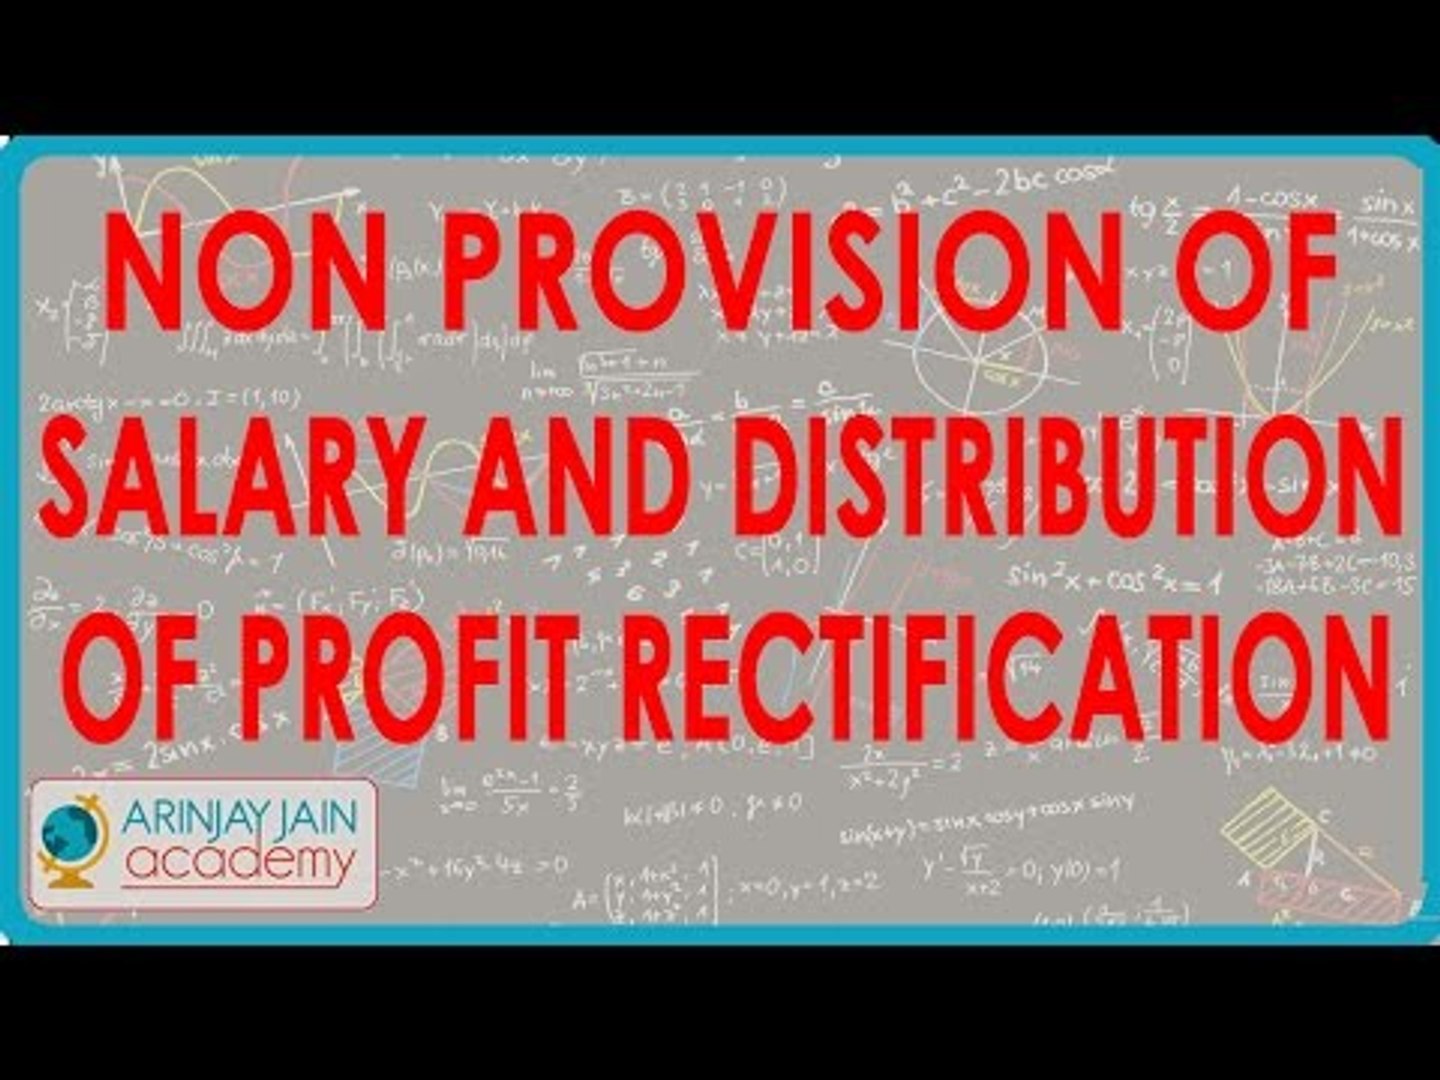 1465. Non provision of Salary and Distribution of profits   Rectification